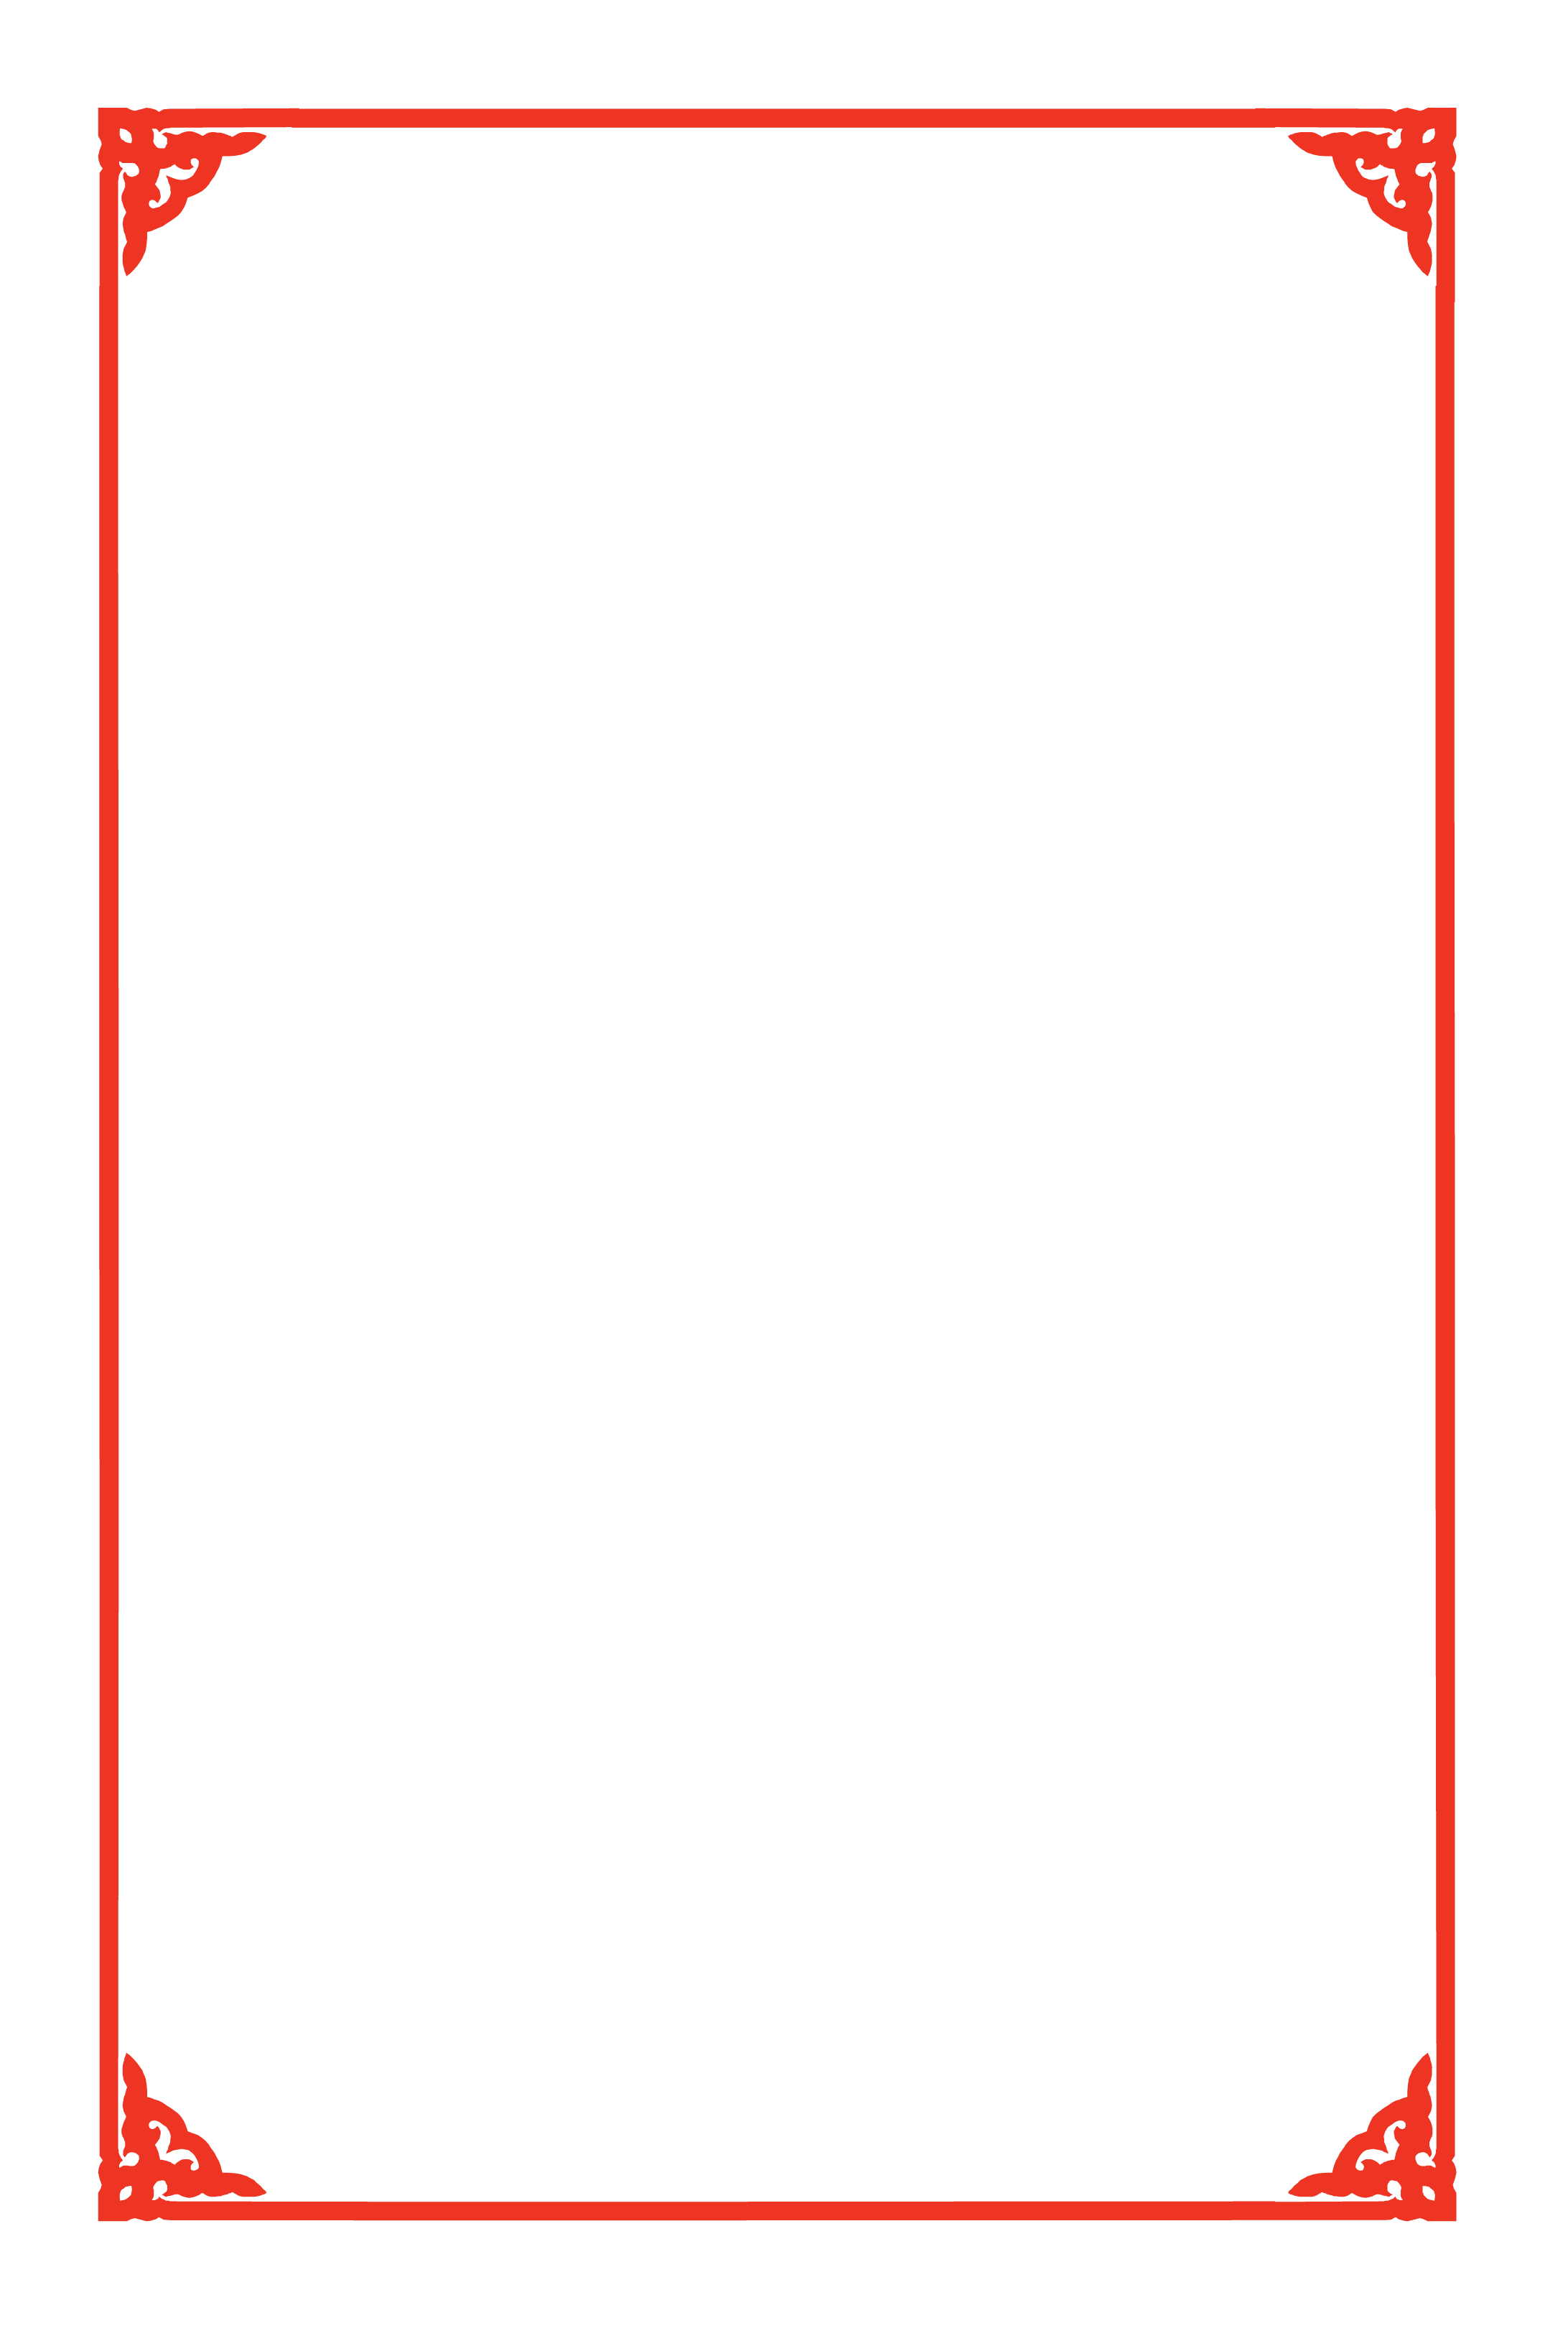 Chinese new year icon. Red border png